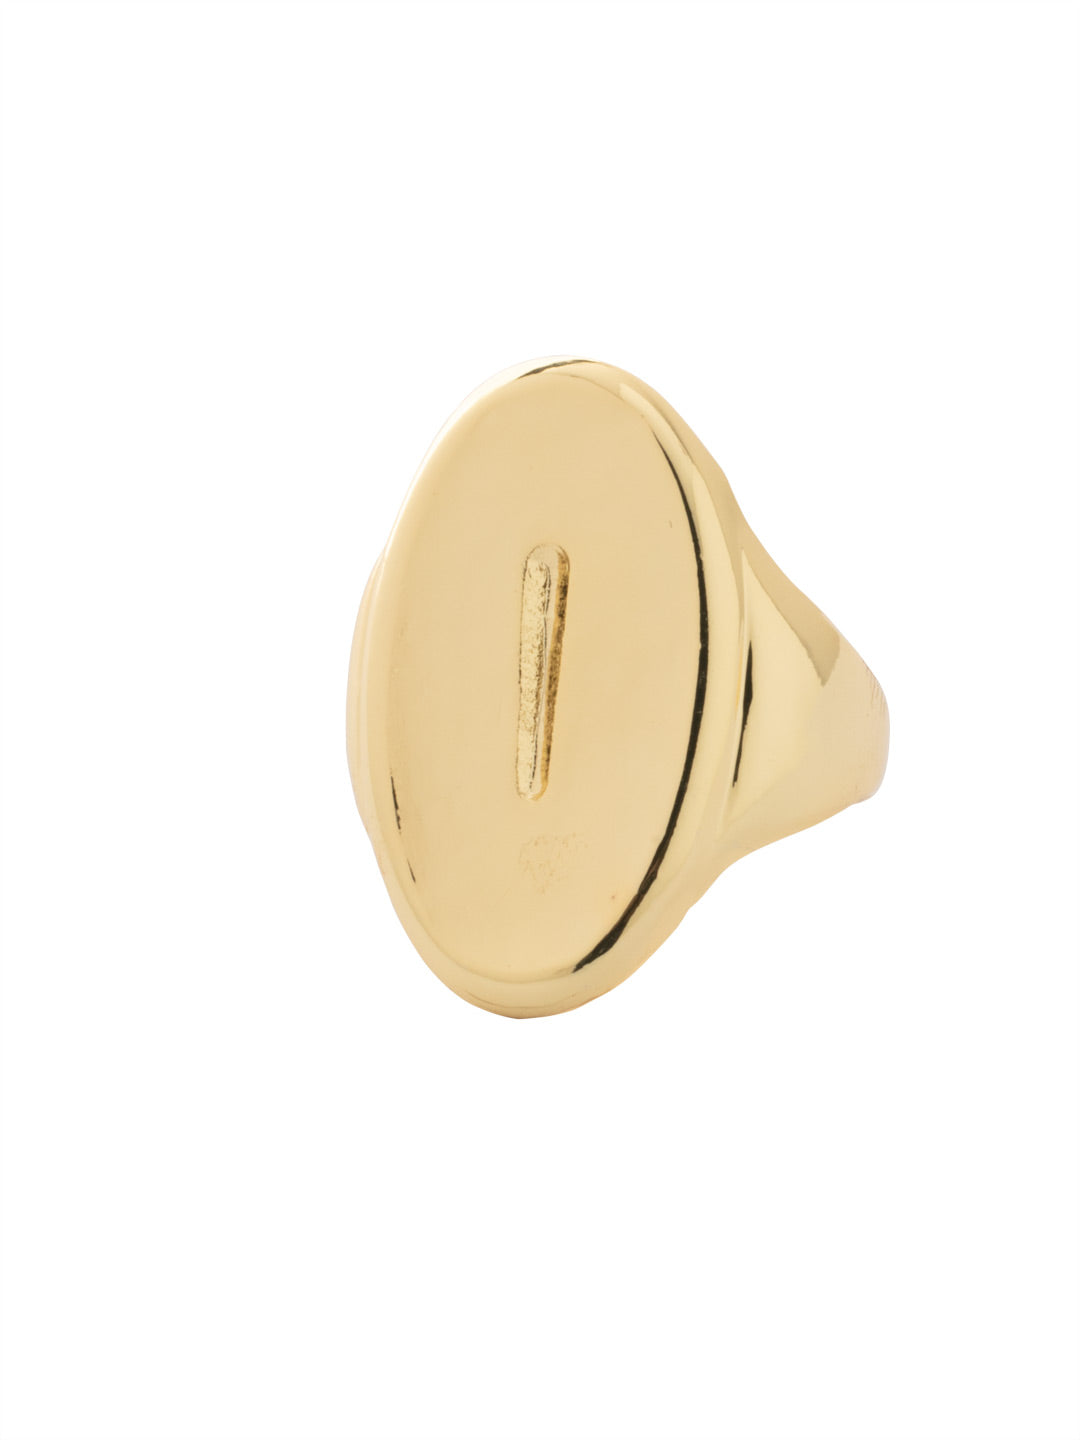 "I" Signet Statement Ring - RFK38BGMTL - <p>The Signet Statement Ring features a capital letter stamped into an oblong metal disk on an adjustable ring band. From Sorrelli's Bare Metallic collection in our Bright Gold-tone finish.</p>